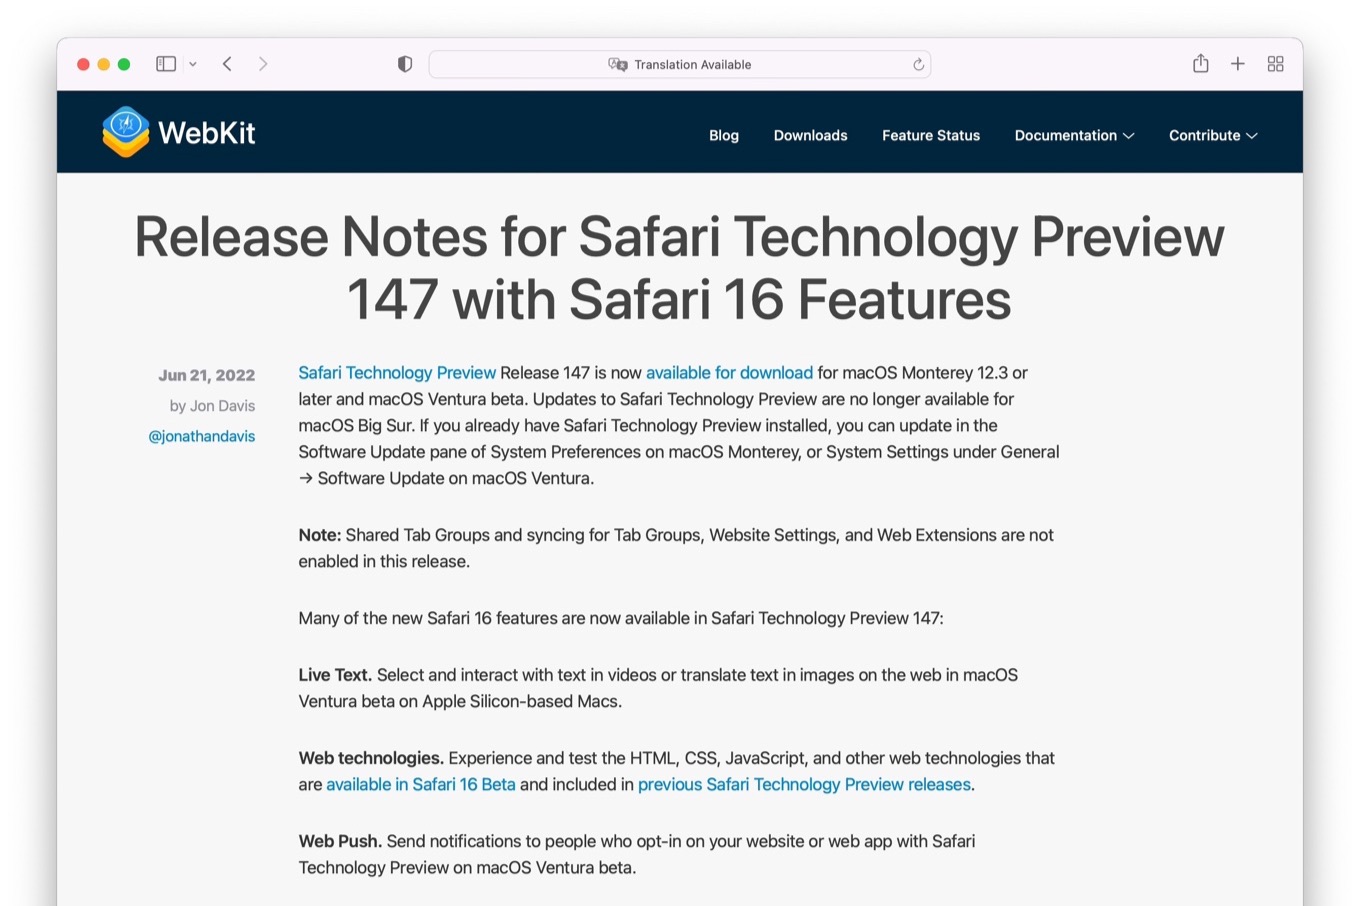 Release Notes for Safari Technology Preview 147 with Safari 16 Features